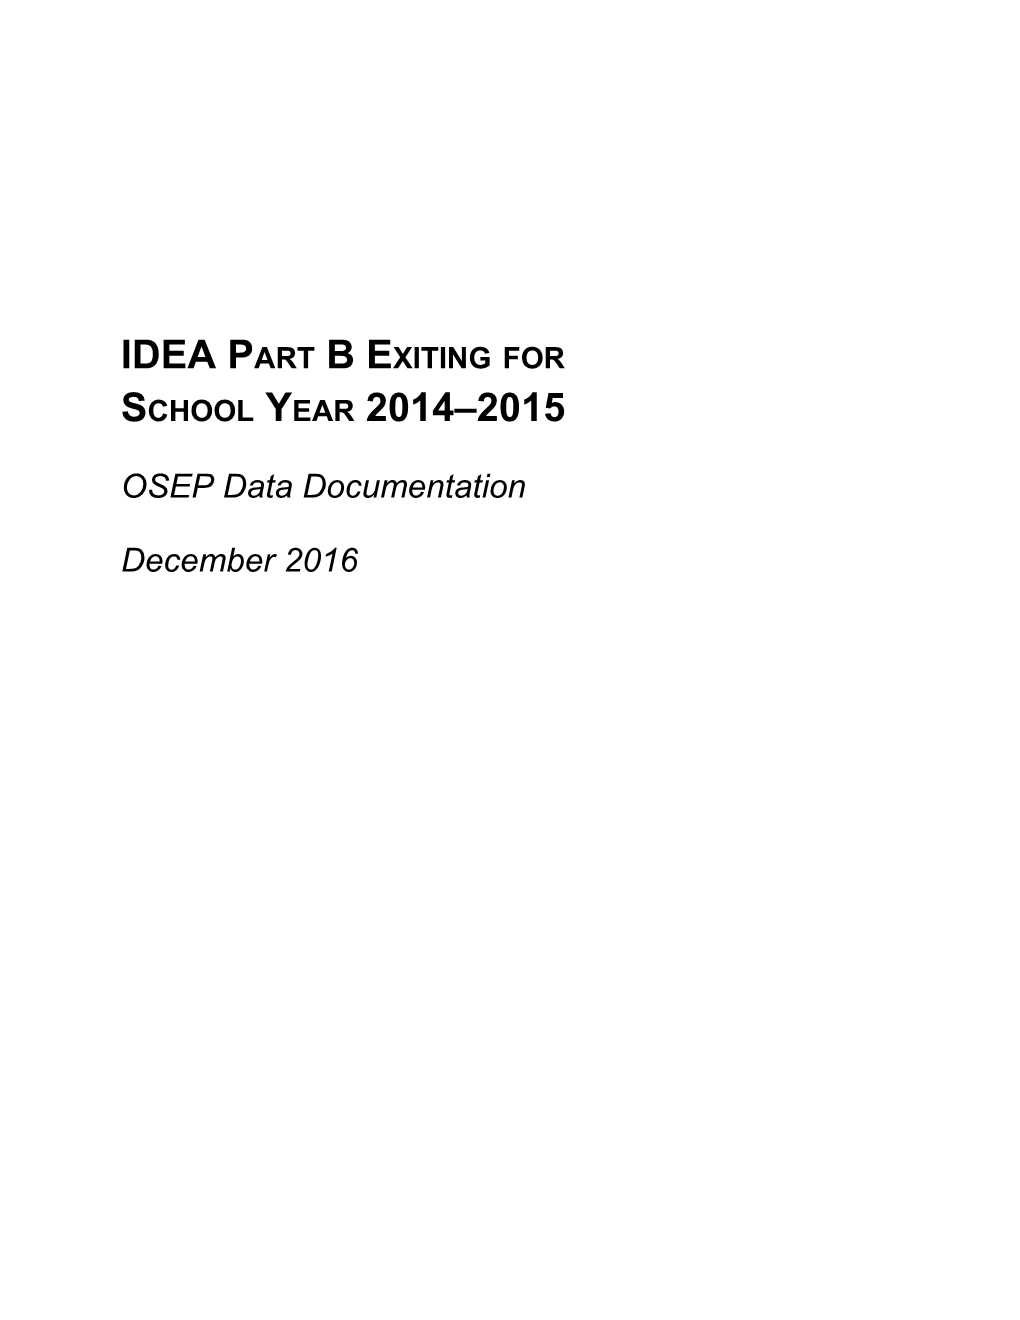 IDEA Part B Exiting for School Year 2014 2015 (MS Word)